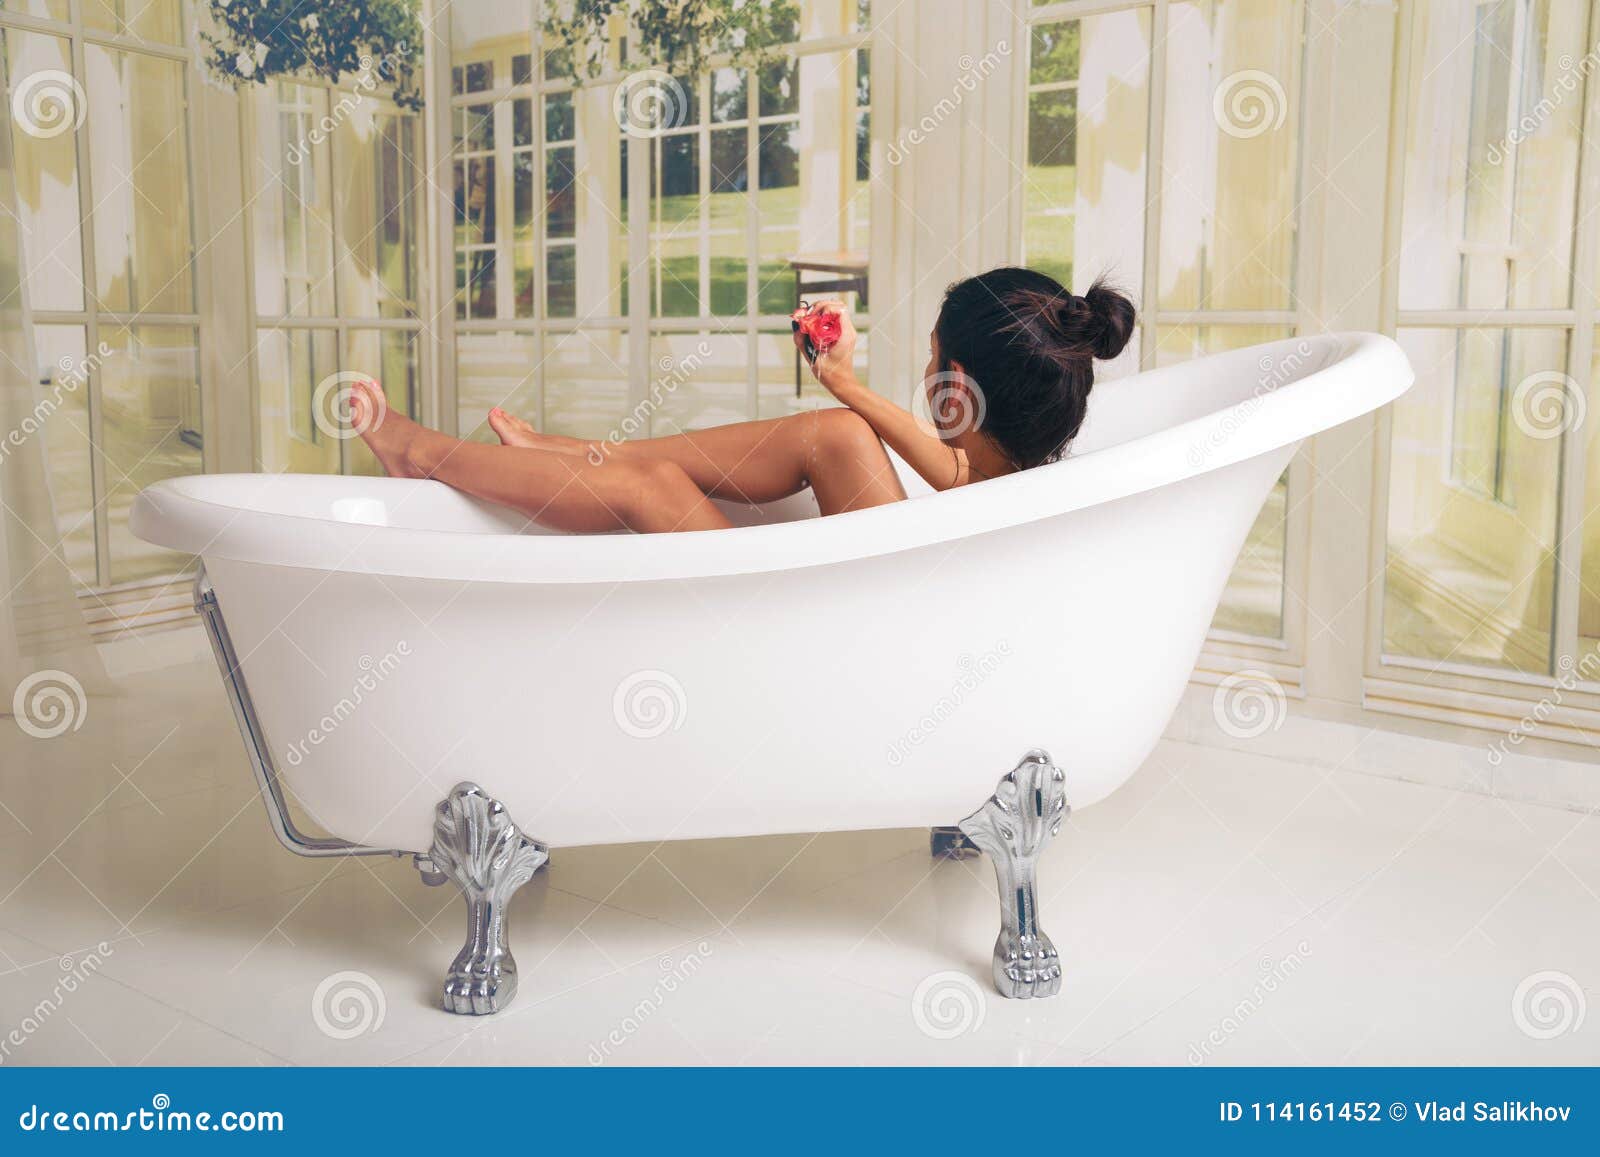 Girl Having Fun In The Tub She Is In A Spacious And Elegant